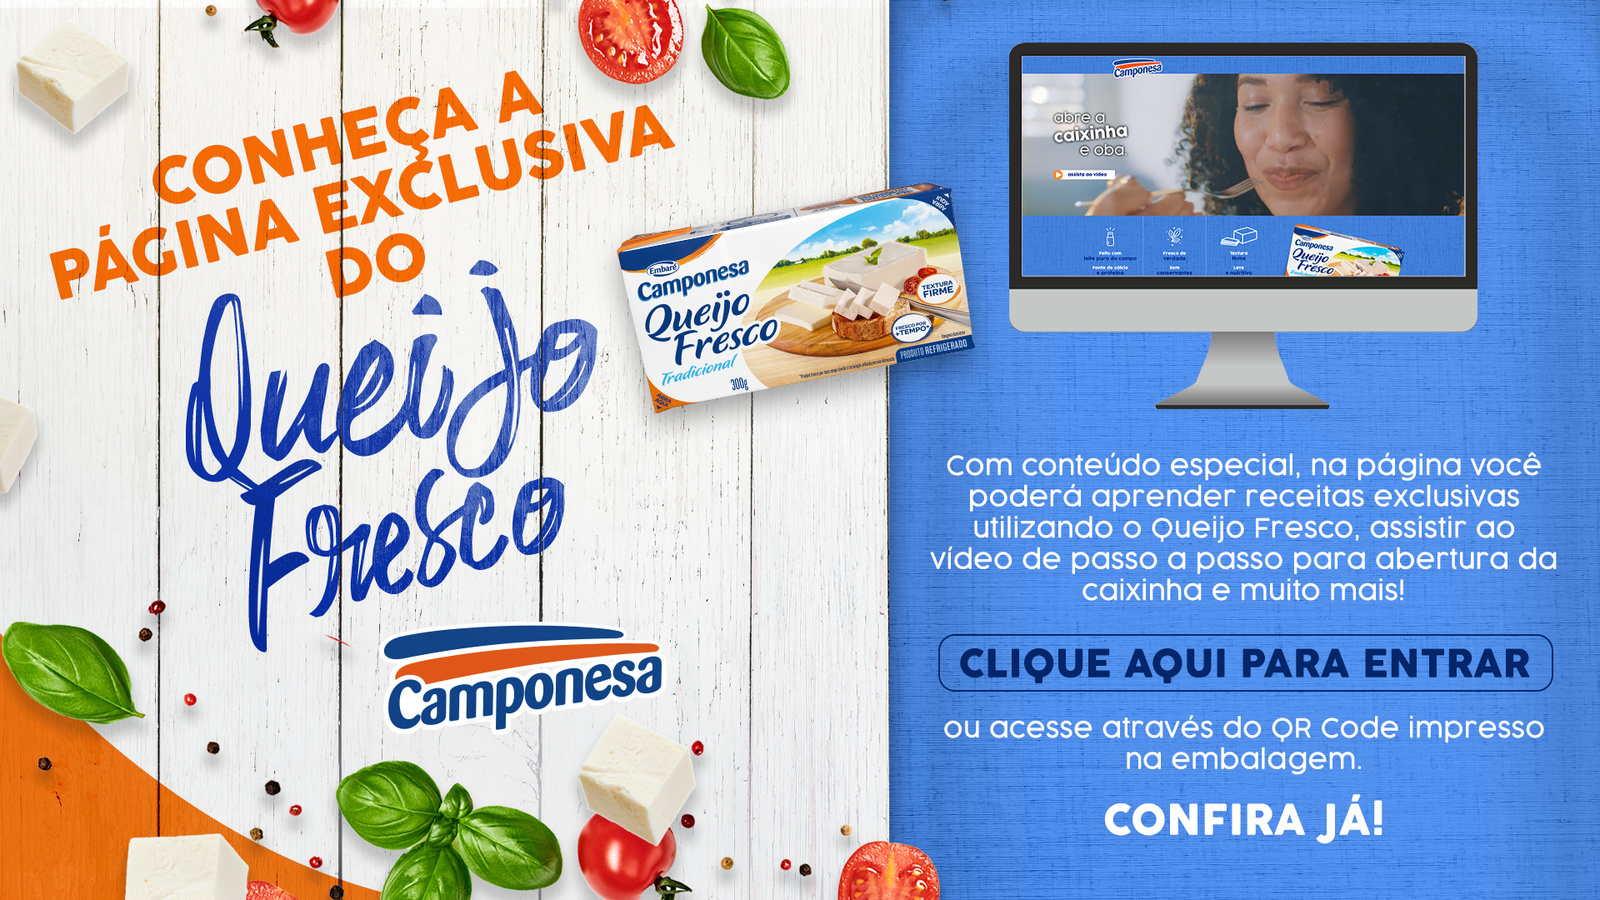 Fresh Cheese landing page Camponesa